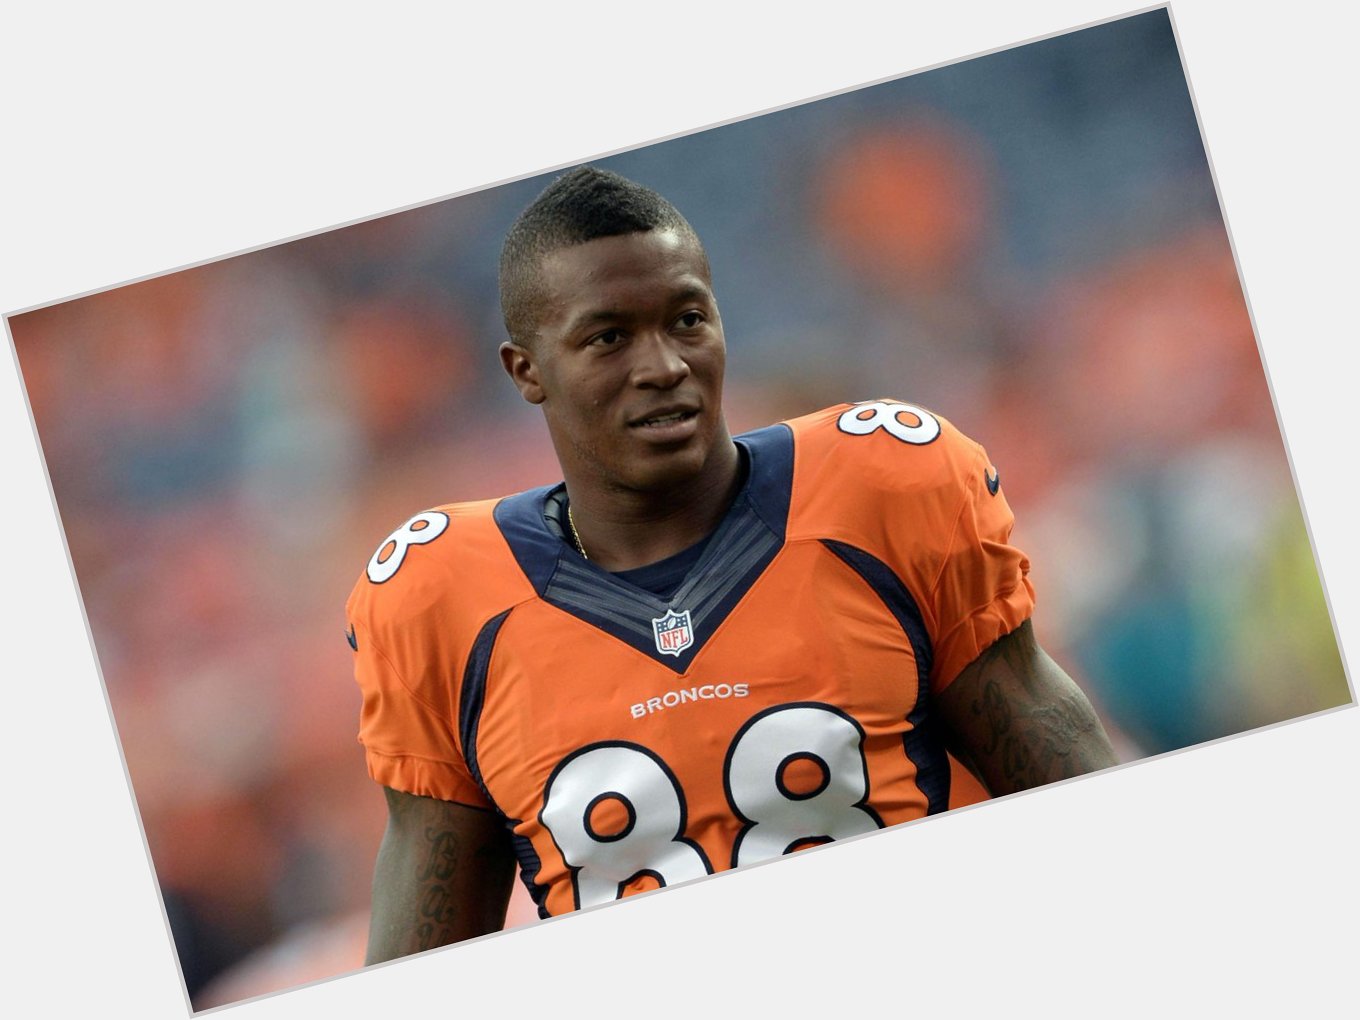 Happy 27th birthday to the one and only Demaryius Thomas! Congratulations 